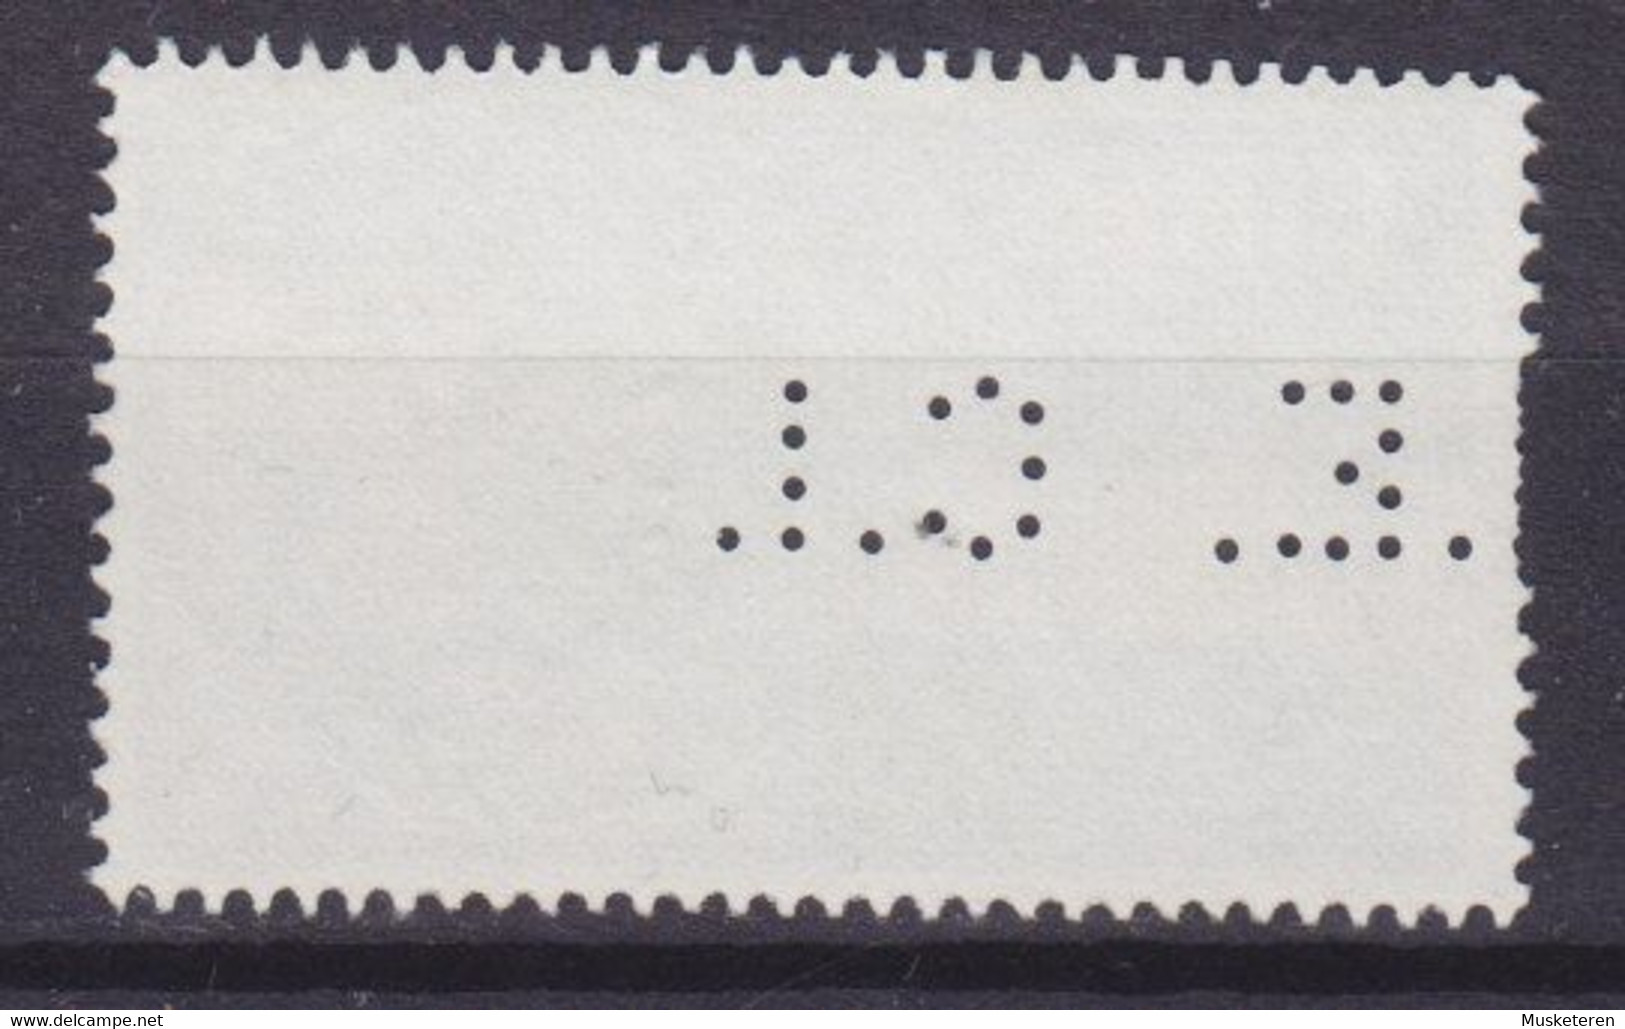 Ireland Perfin Perforé Lochung 'E.C.I.'? ERROR Variety Misplaced Perf. UIT Stamp CORCAIGH Cork 1965 Cancel - Imperforates, Proofs & Errors